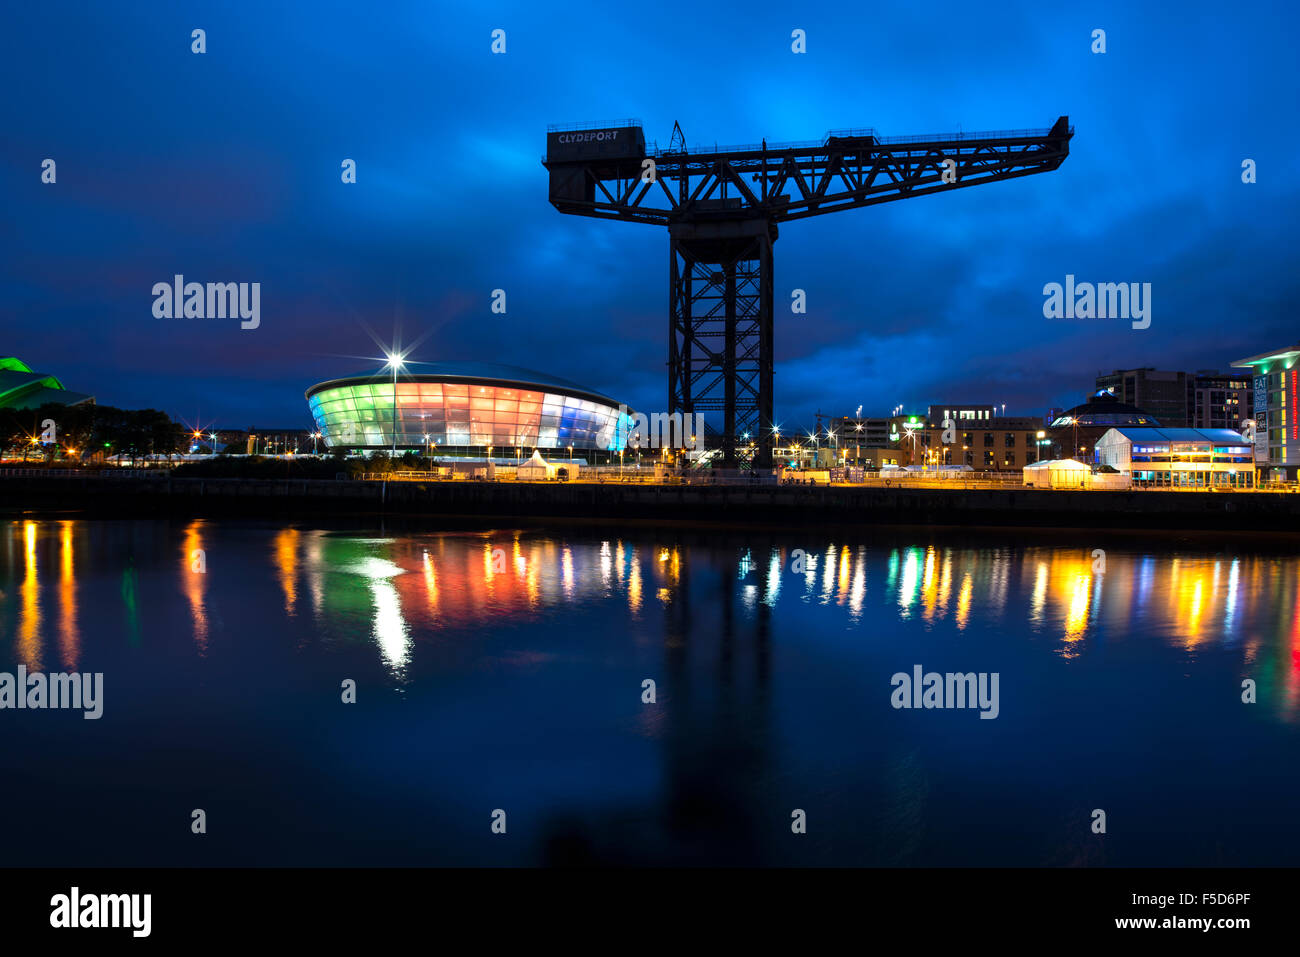 Clyde side Hydro in Glasgow at night Stock Photo